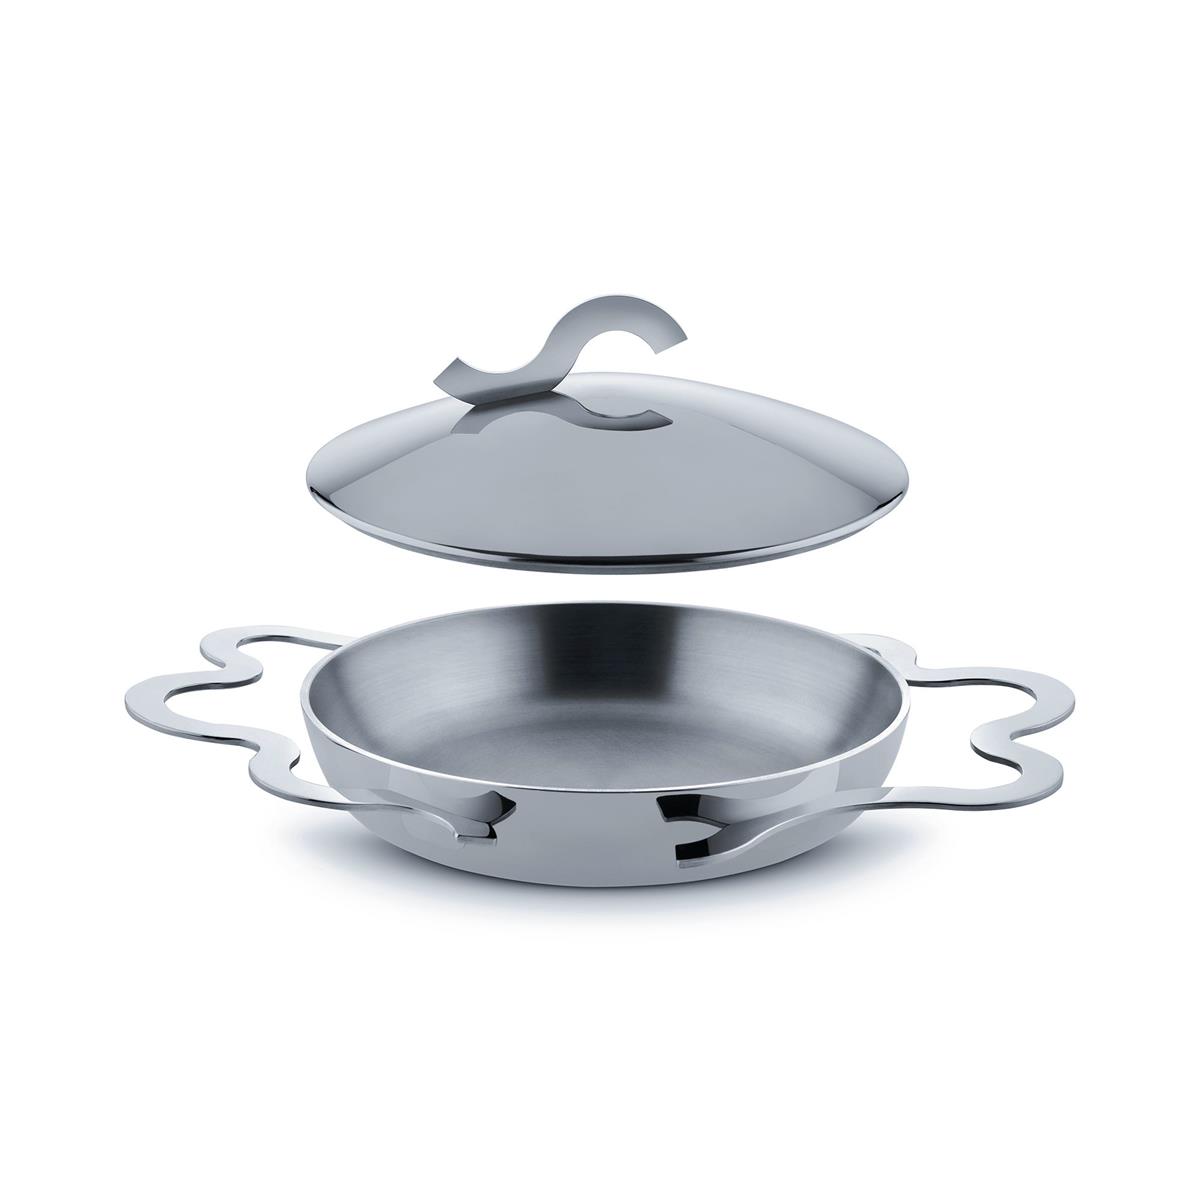 Alessi-Pots & Pans Frying pan with long handle in 18/10 stainless steel mirror polished